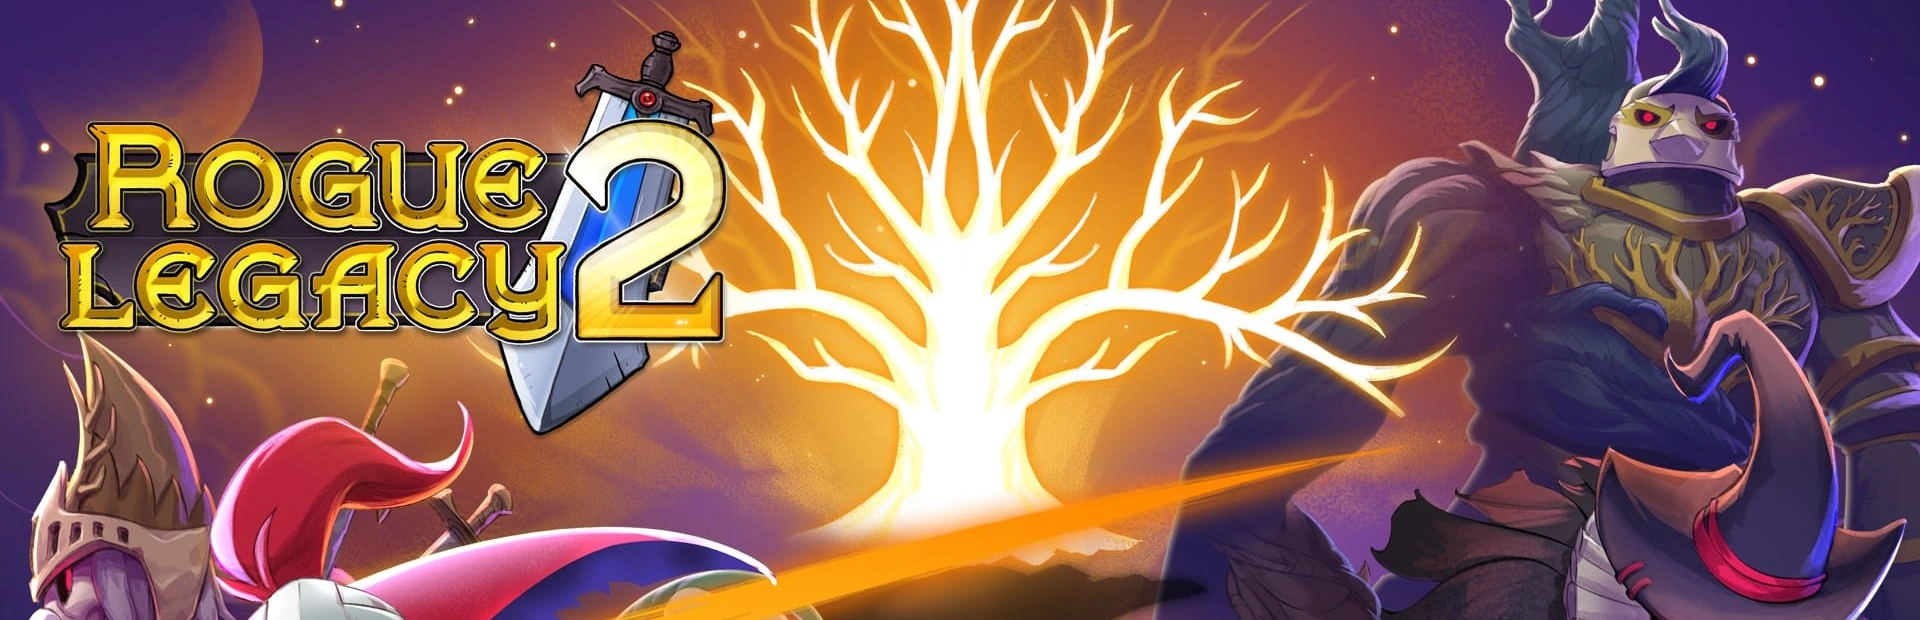 Rogue.Legacy.2.banner2